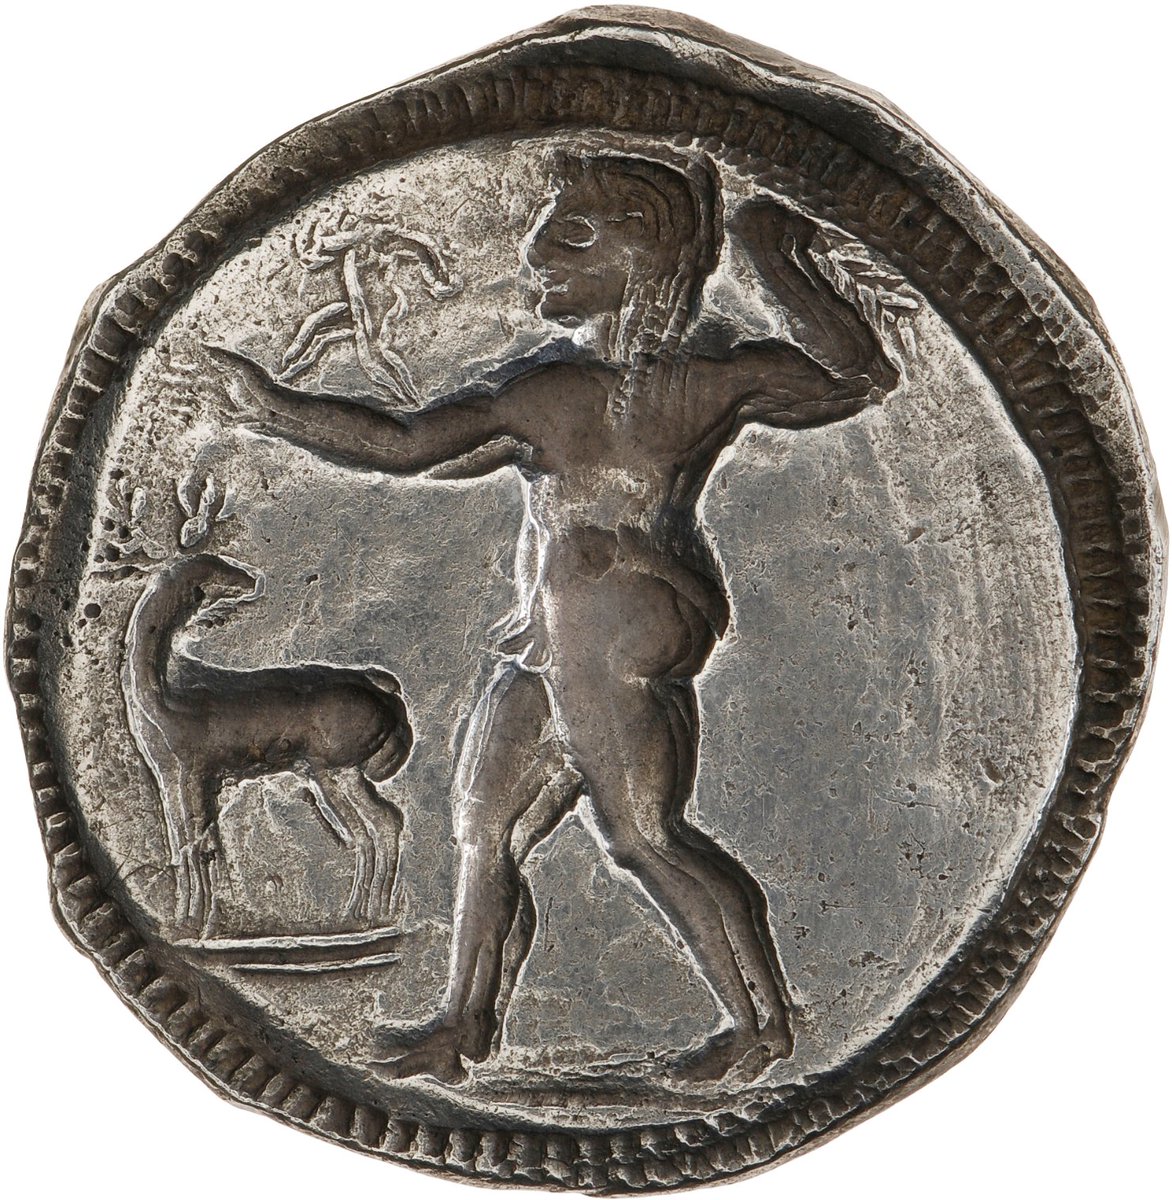 The Reverse is the incuse representation of the scene. The inclusion of Apollo in the design is evocative of the role that Delphian Apollo played in the colonies of Magna Graecia. The scene itself has been interpreted as referring to Apollo bringing laurel branches from the...